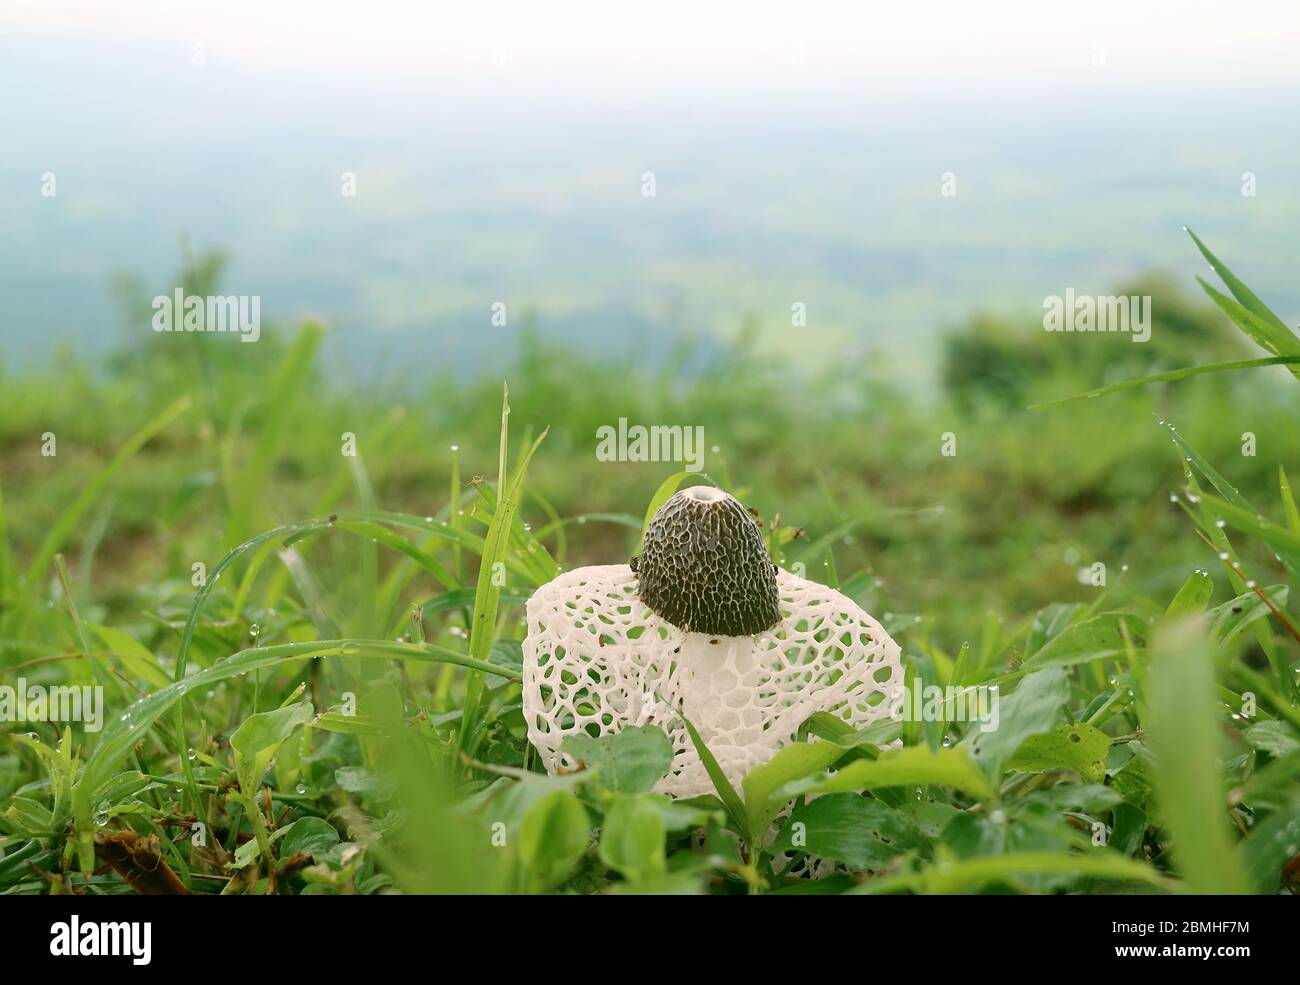 White Long Net Stinkhorn Mushroom or Bamboo Fungus on the Green Grass Field with Morning Dew Stock Photo